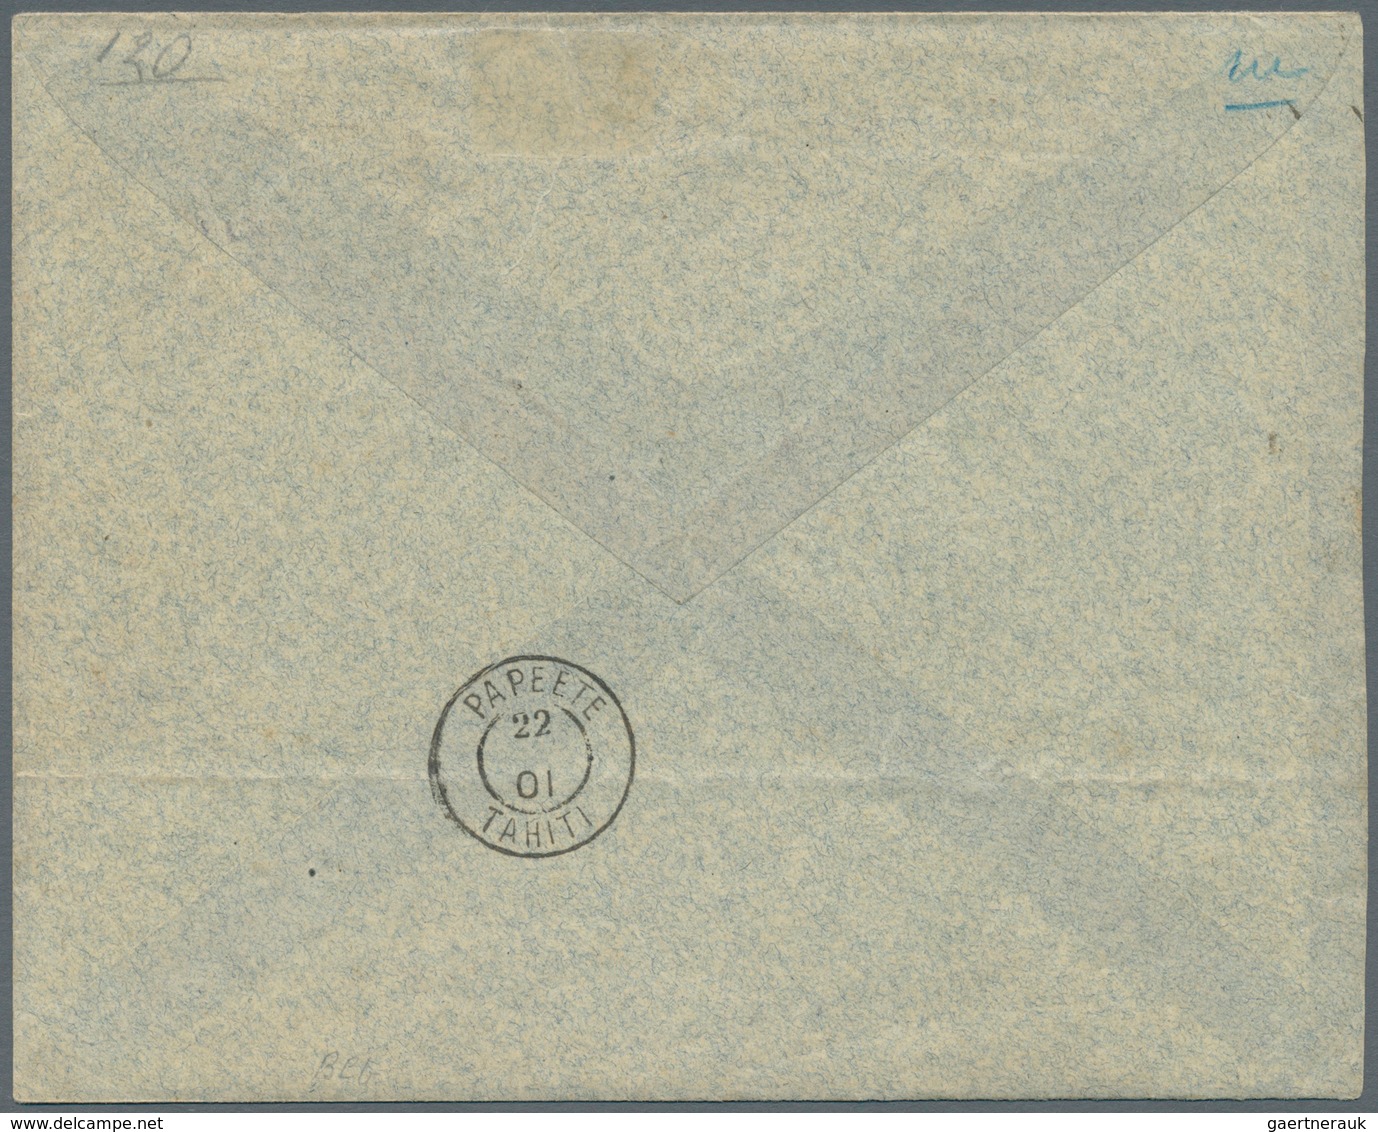 Cook-Inseln: 1901, Angel Tern 1 Sh. Carmin Tied By Cds. "COOK ISLAND...SE.01" To Registered Cover Ad - Cookinseln